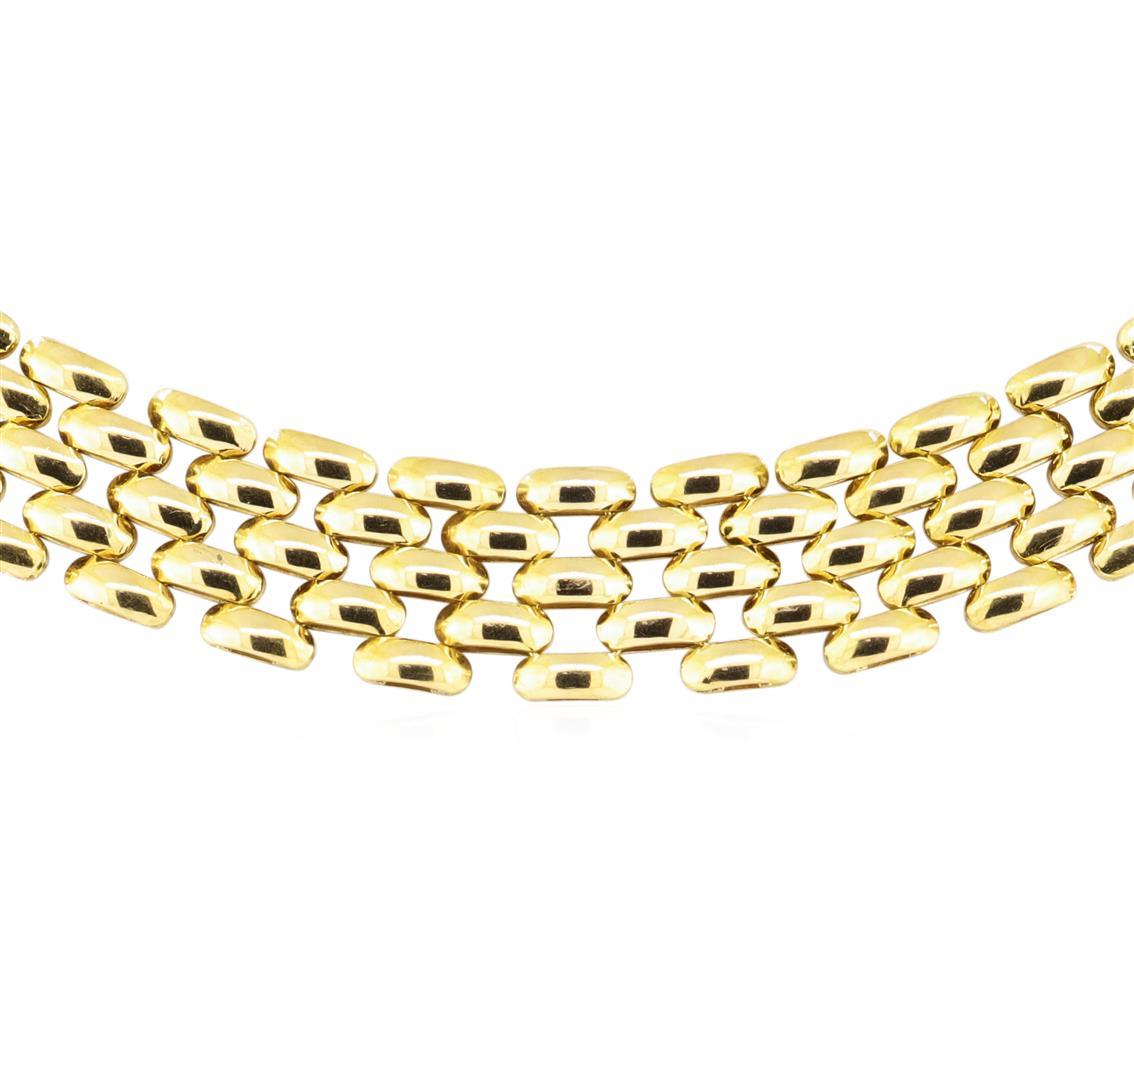 17.75 Inch Five Row Panther Link Chain - 18KT Yellow Gold